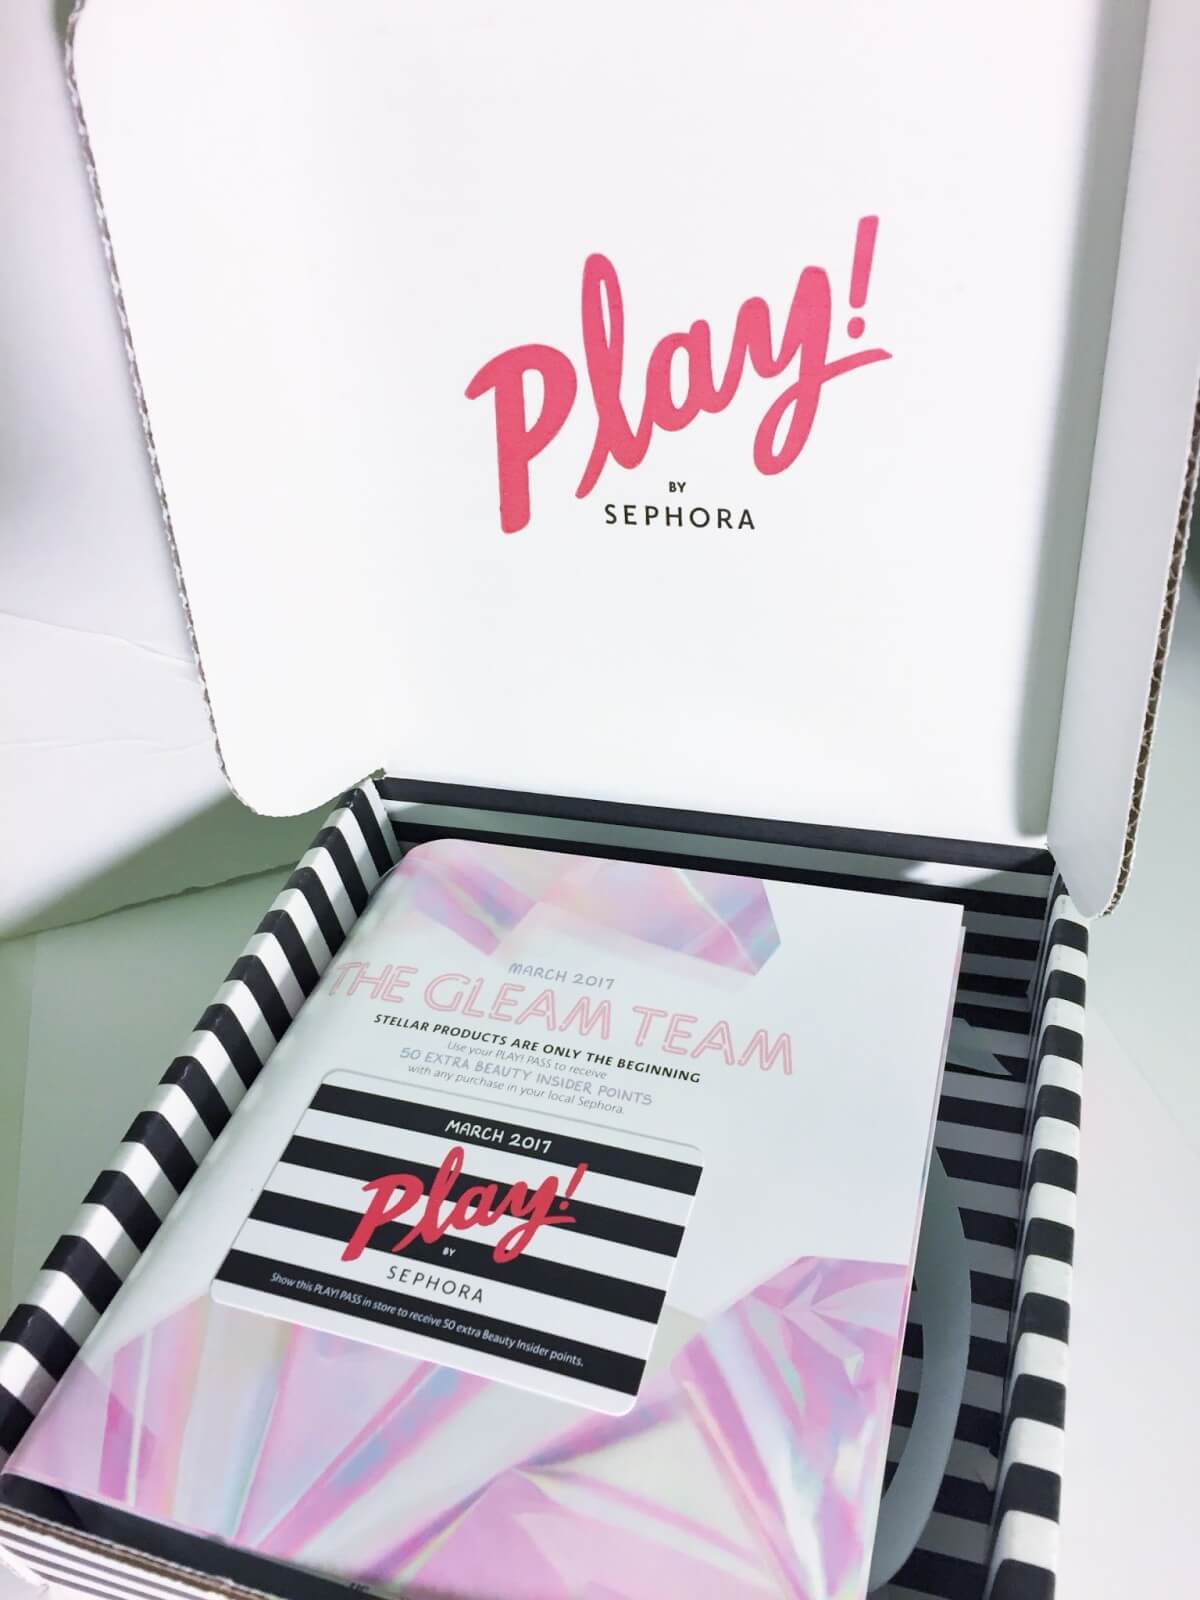 Play! by Sephora March 2017 review